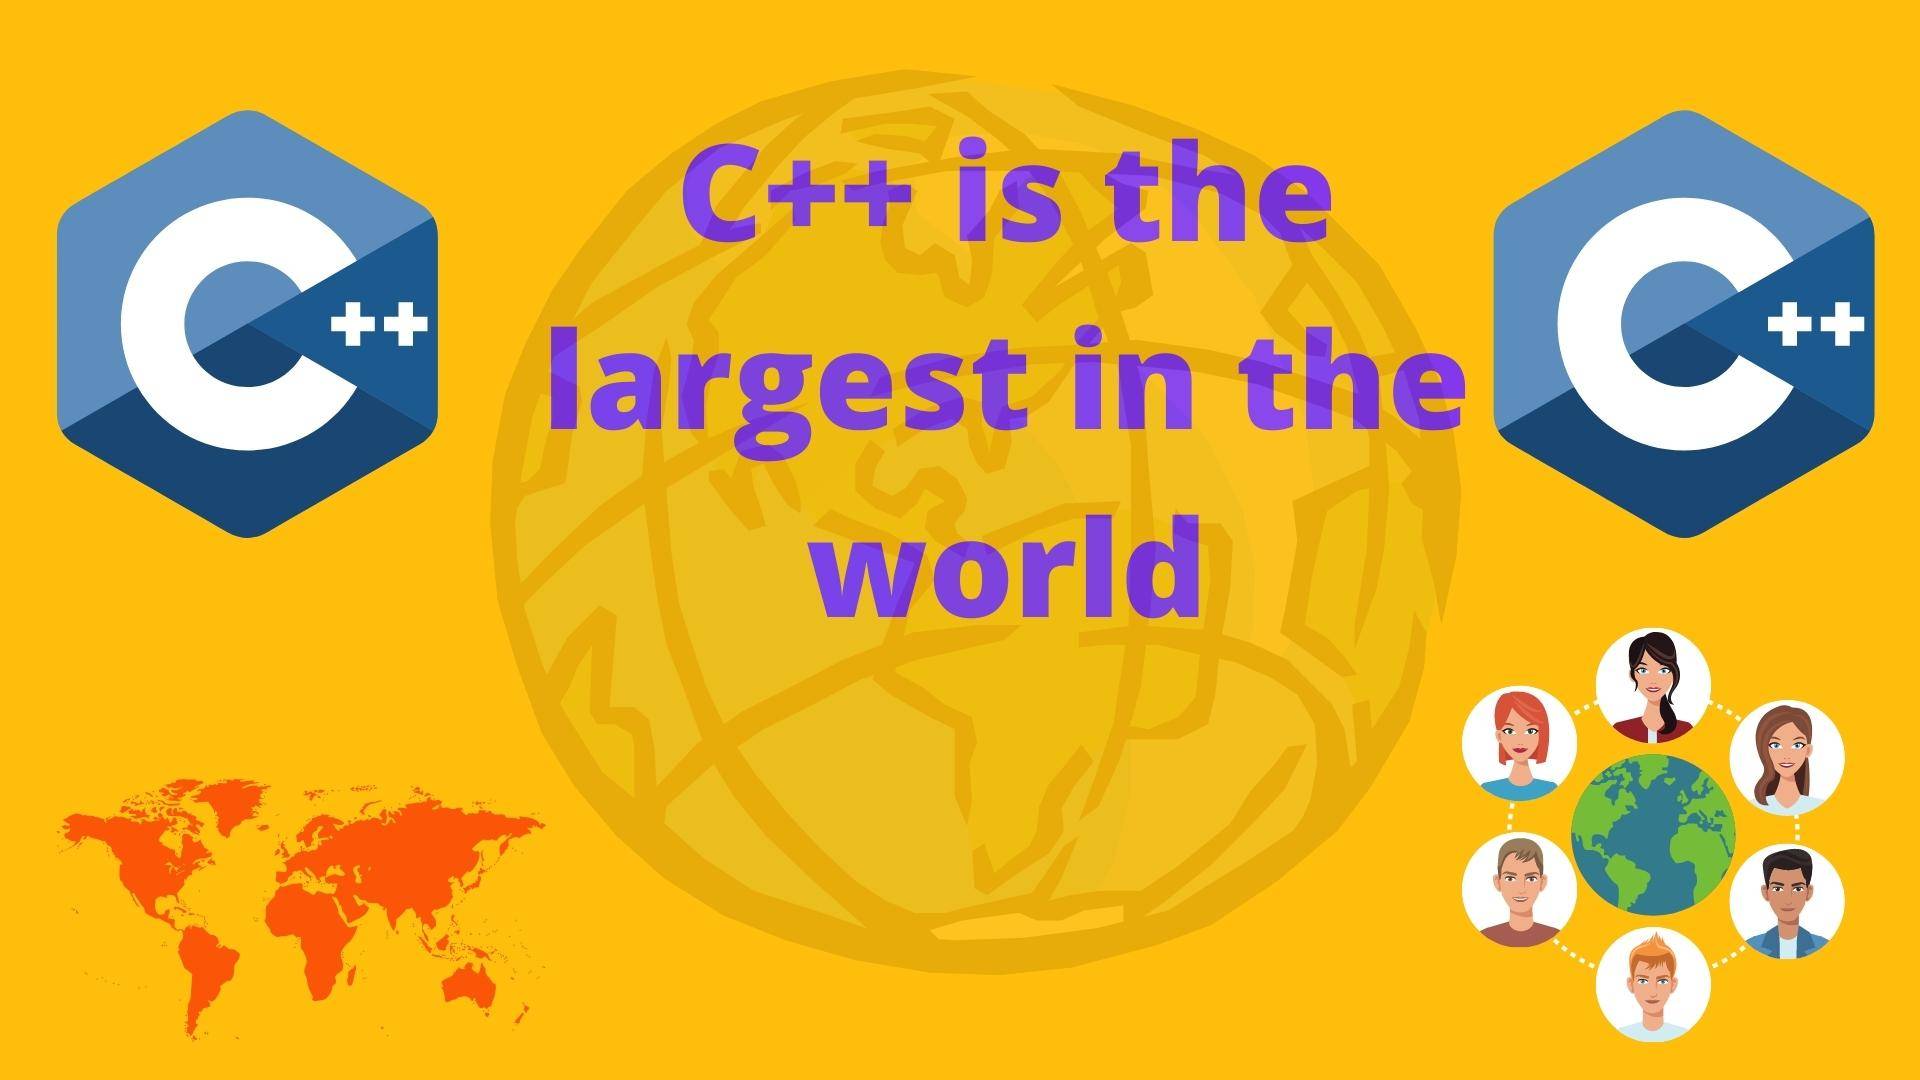 C++language is the largest in the world